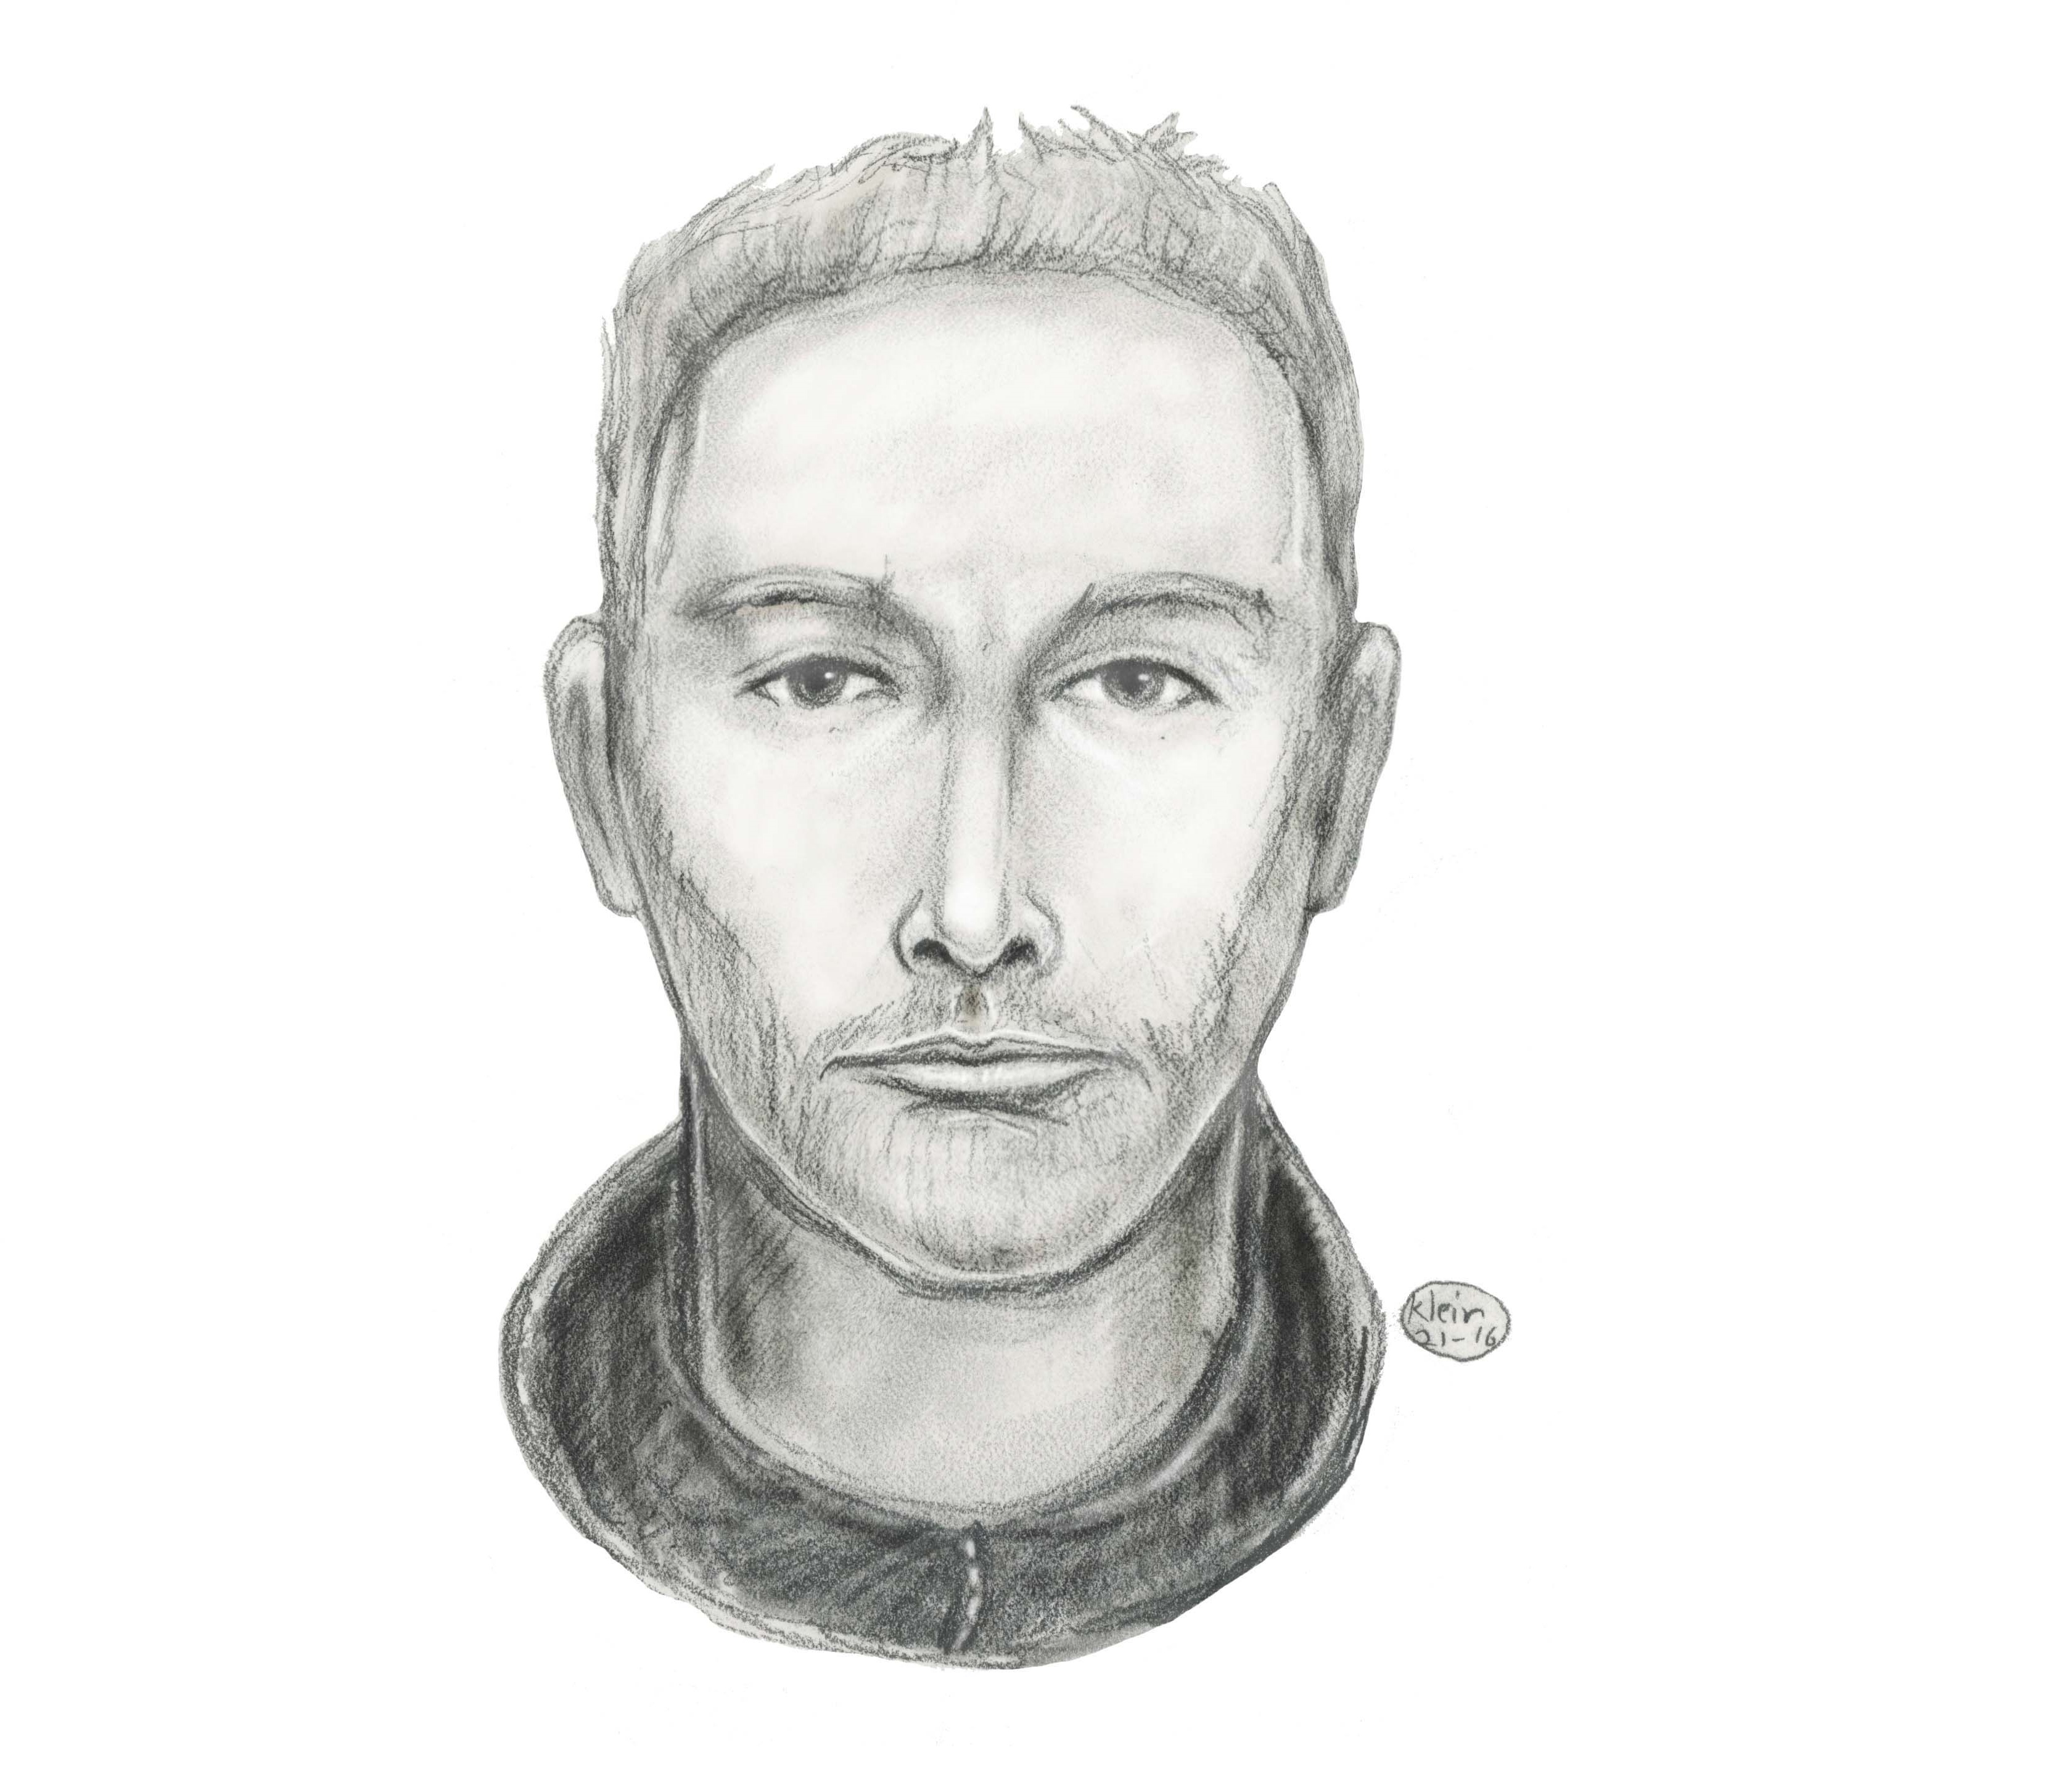 Police are looking for a suspect who struck a passenger on the E train with a wooden stick.